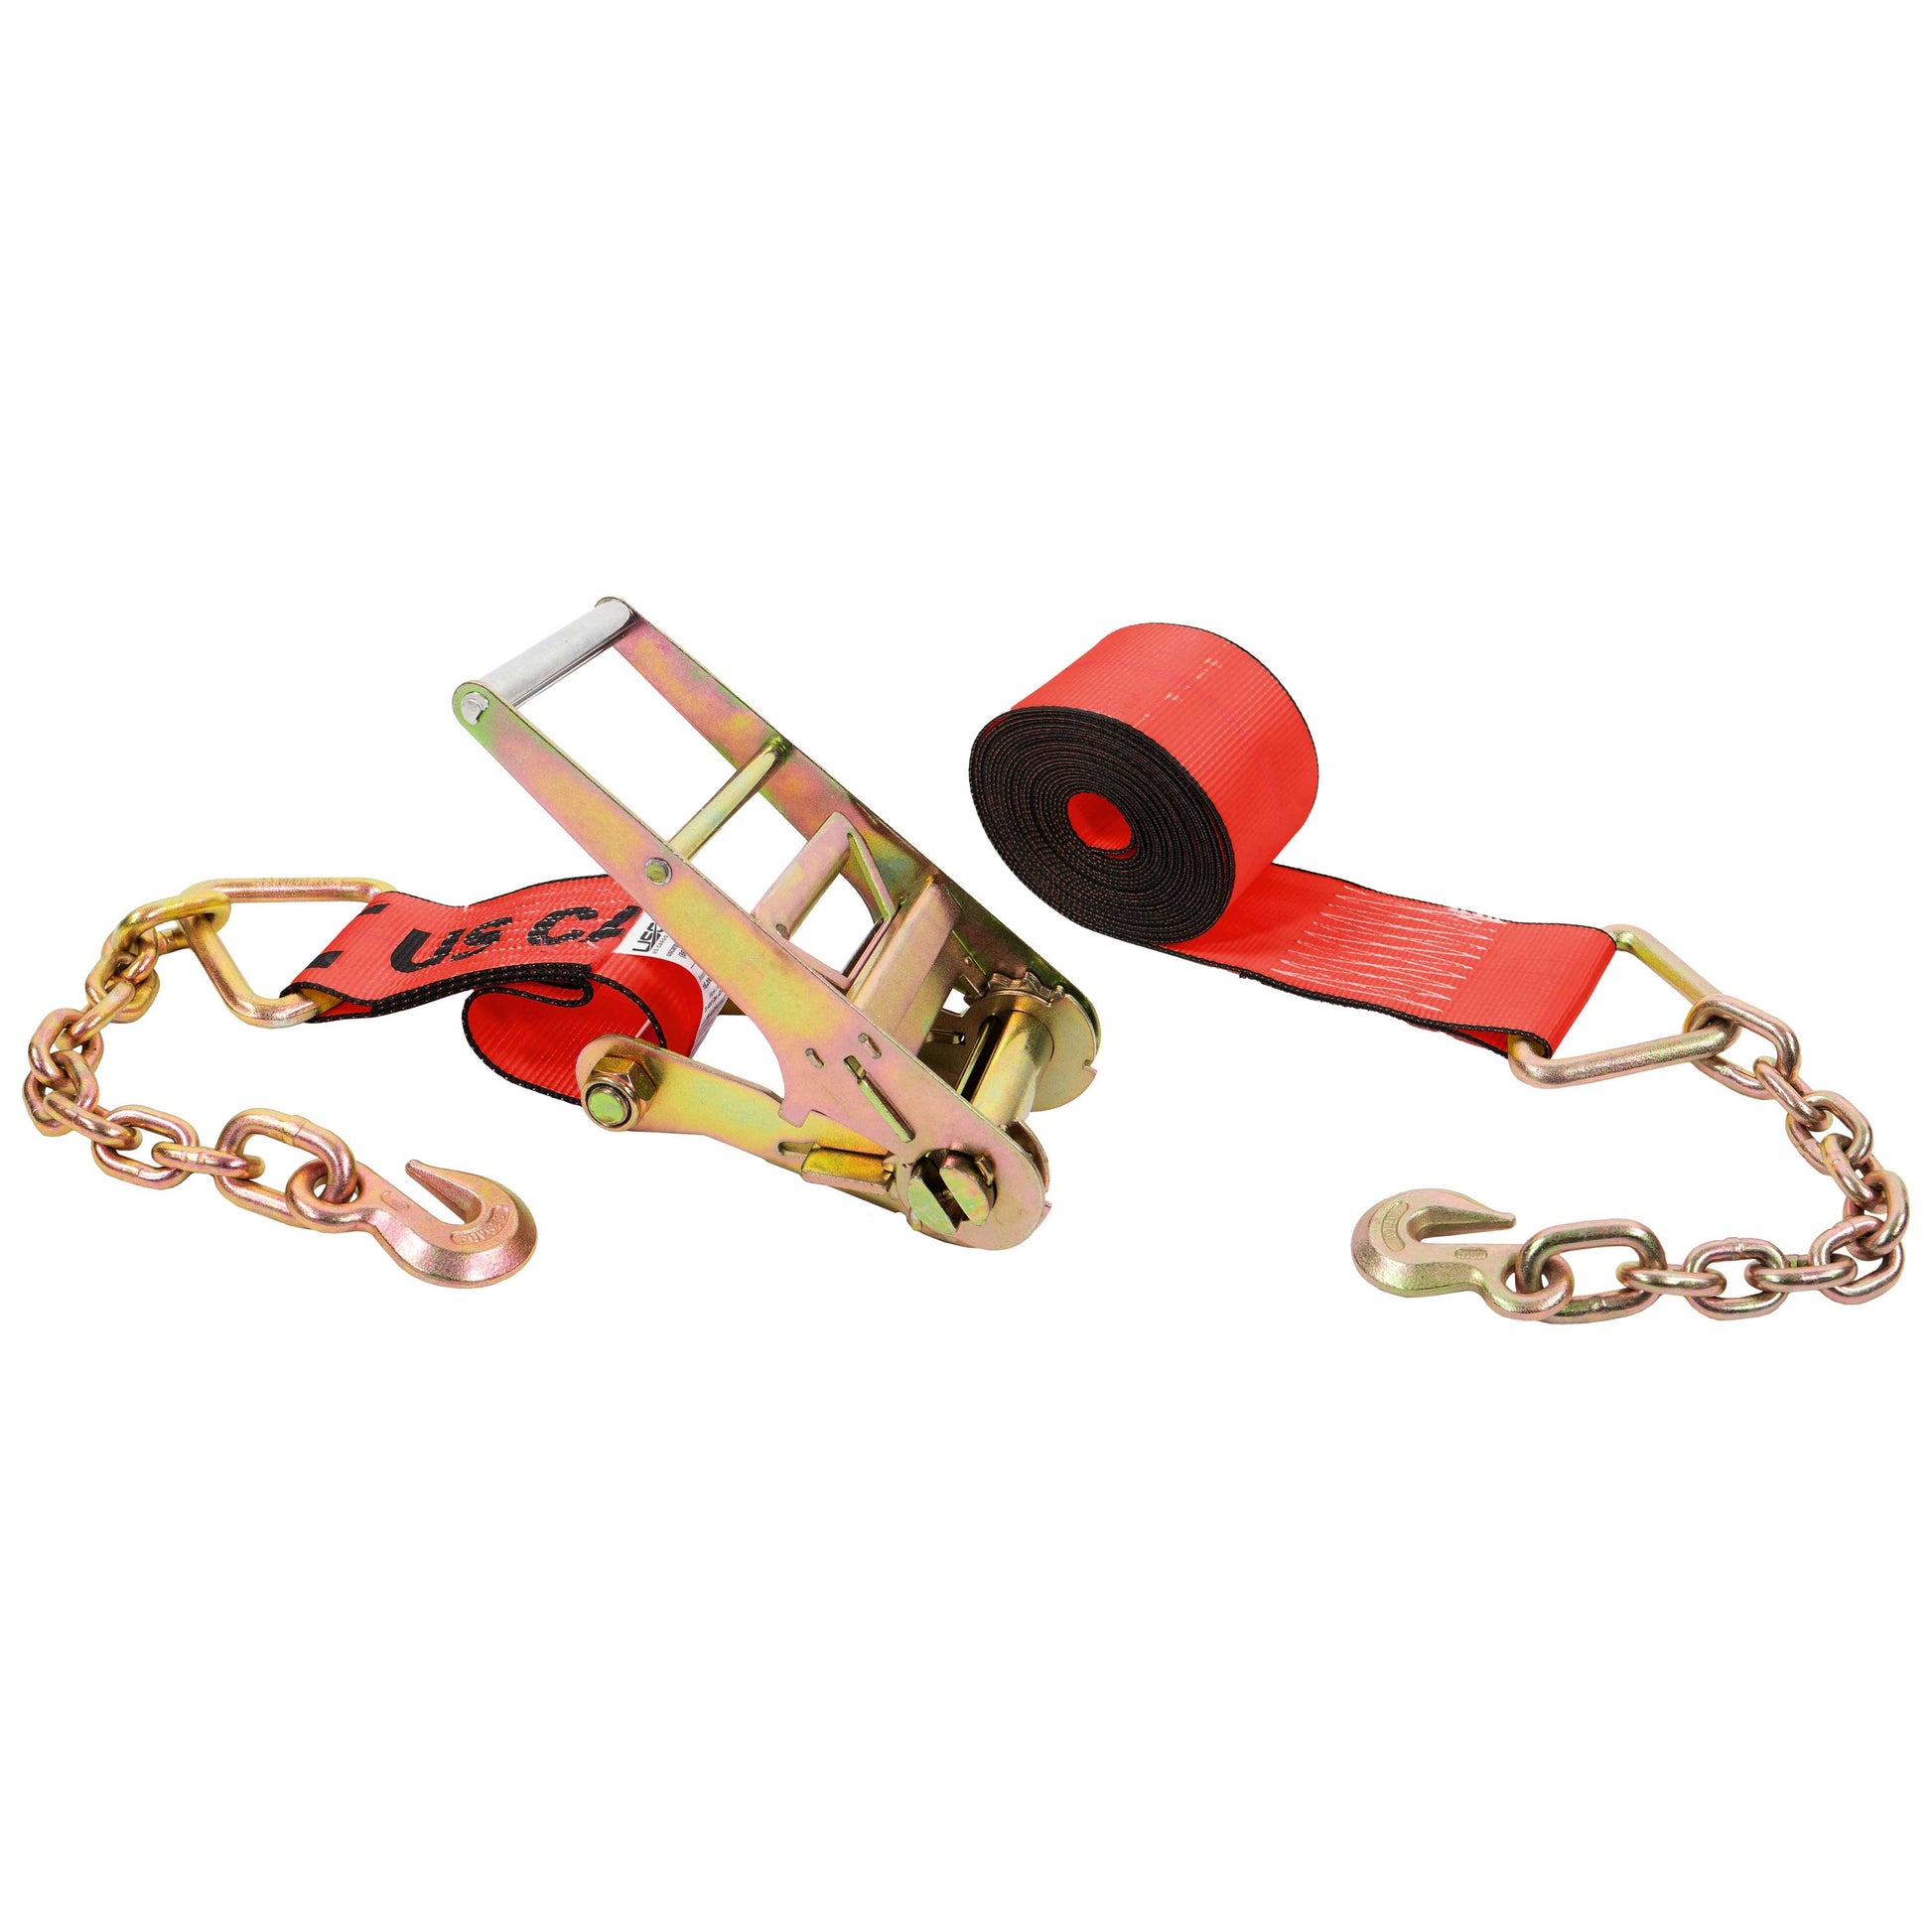 30' 4" heavy-duty red chain extension ratchet strap